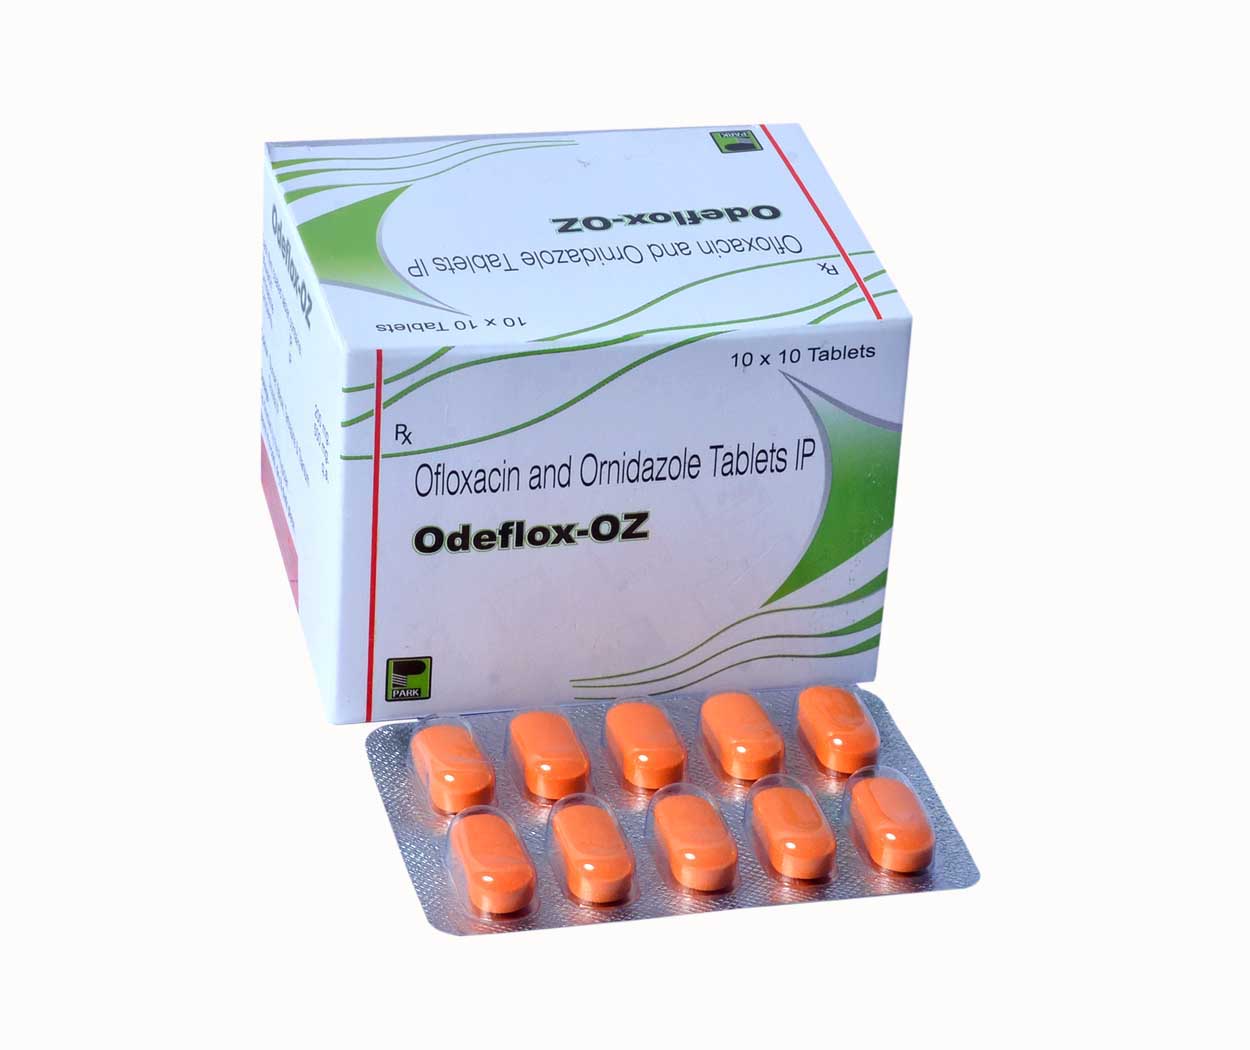 Product Name: Odeflox OZ, Compositions of Odeflox OZ are Ofloxacin and Ornidazole Tablets IP - Park Pharmaceuticals